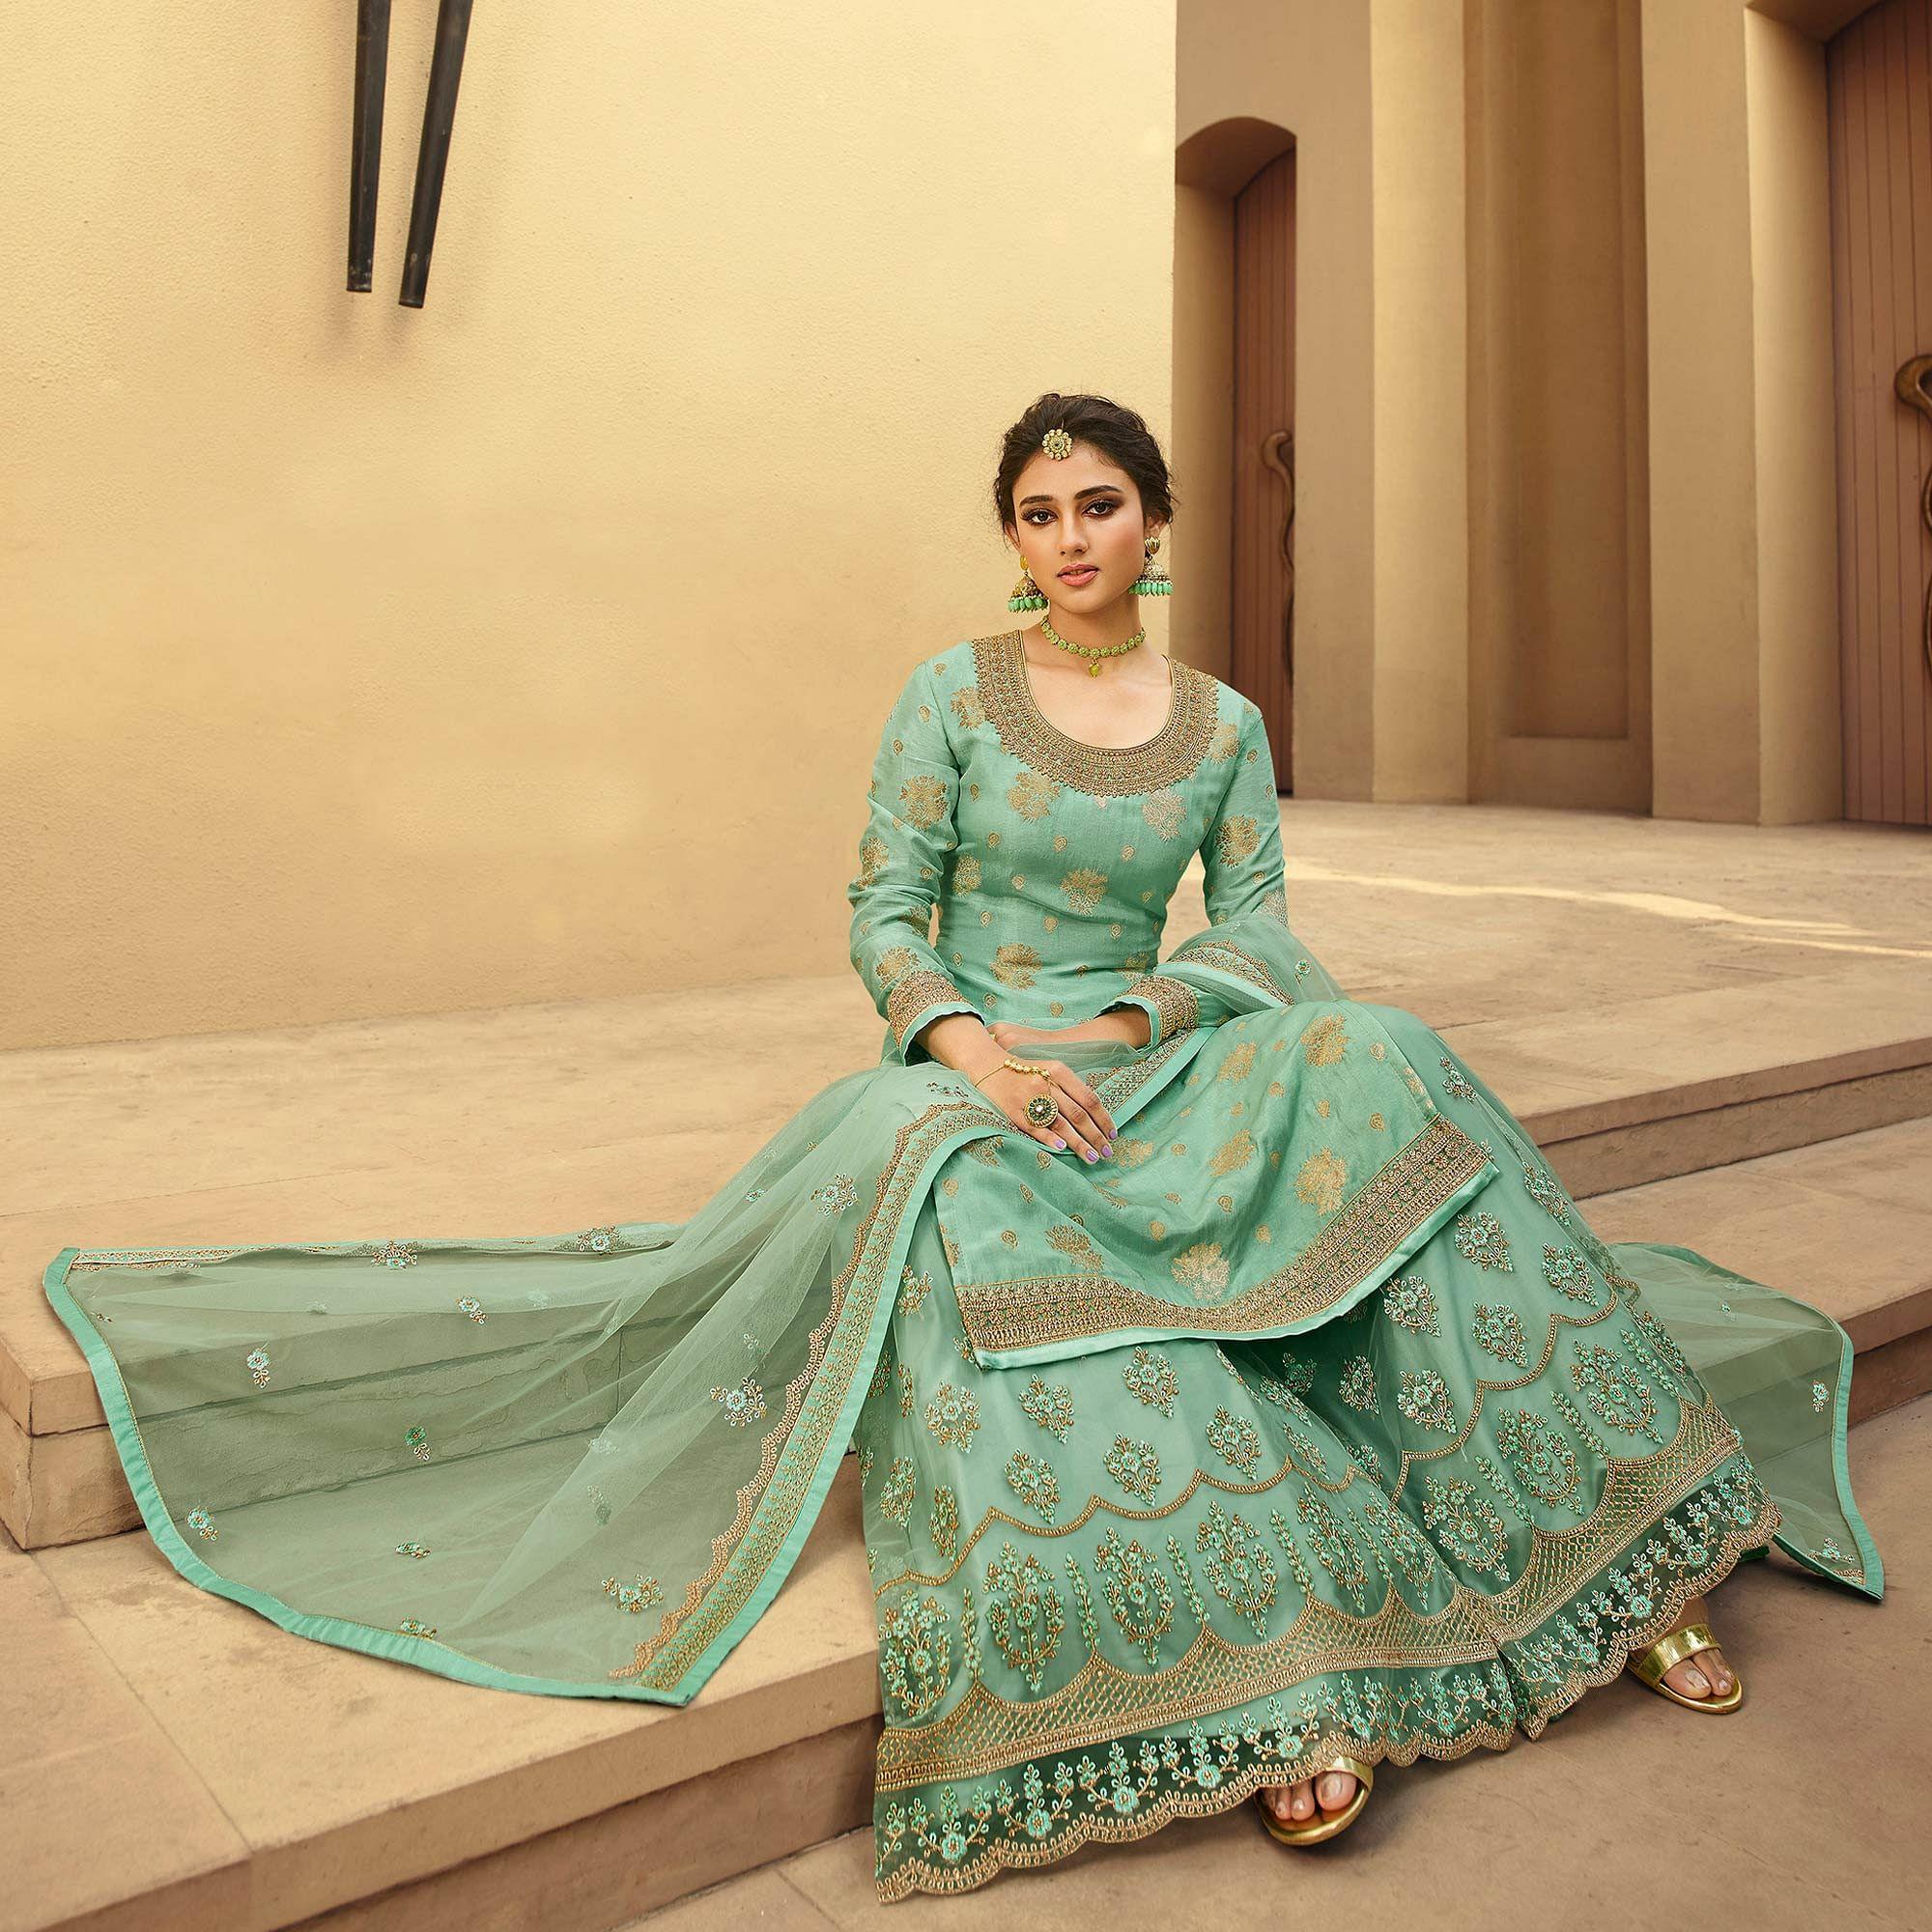 Partywear Designer Floral Embroidery Work Lightseagreen Dola Jaquard Silkplazzo Suit - Peachmode